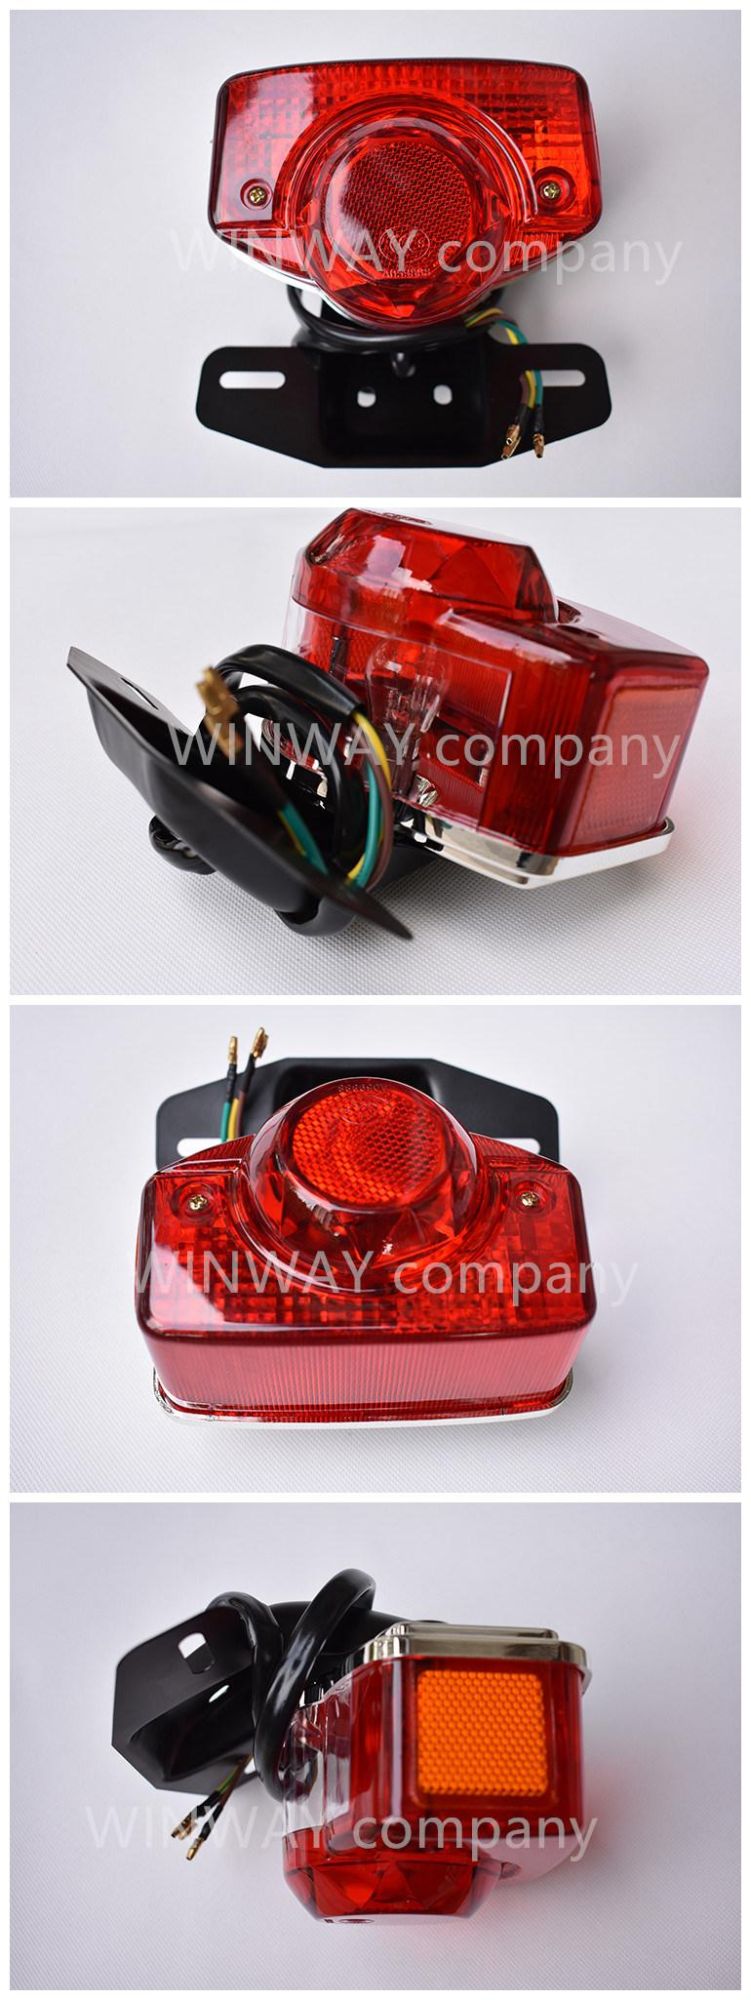 Ww-6017 12V Rear Brake Tail Light Motorcycle Parts for Jh70